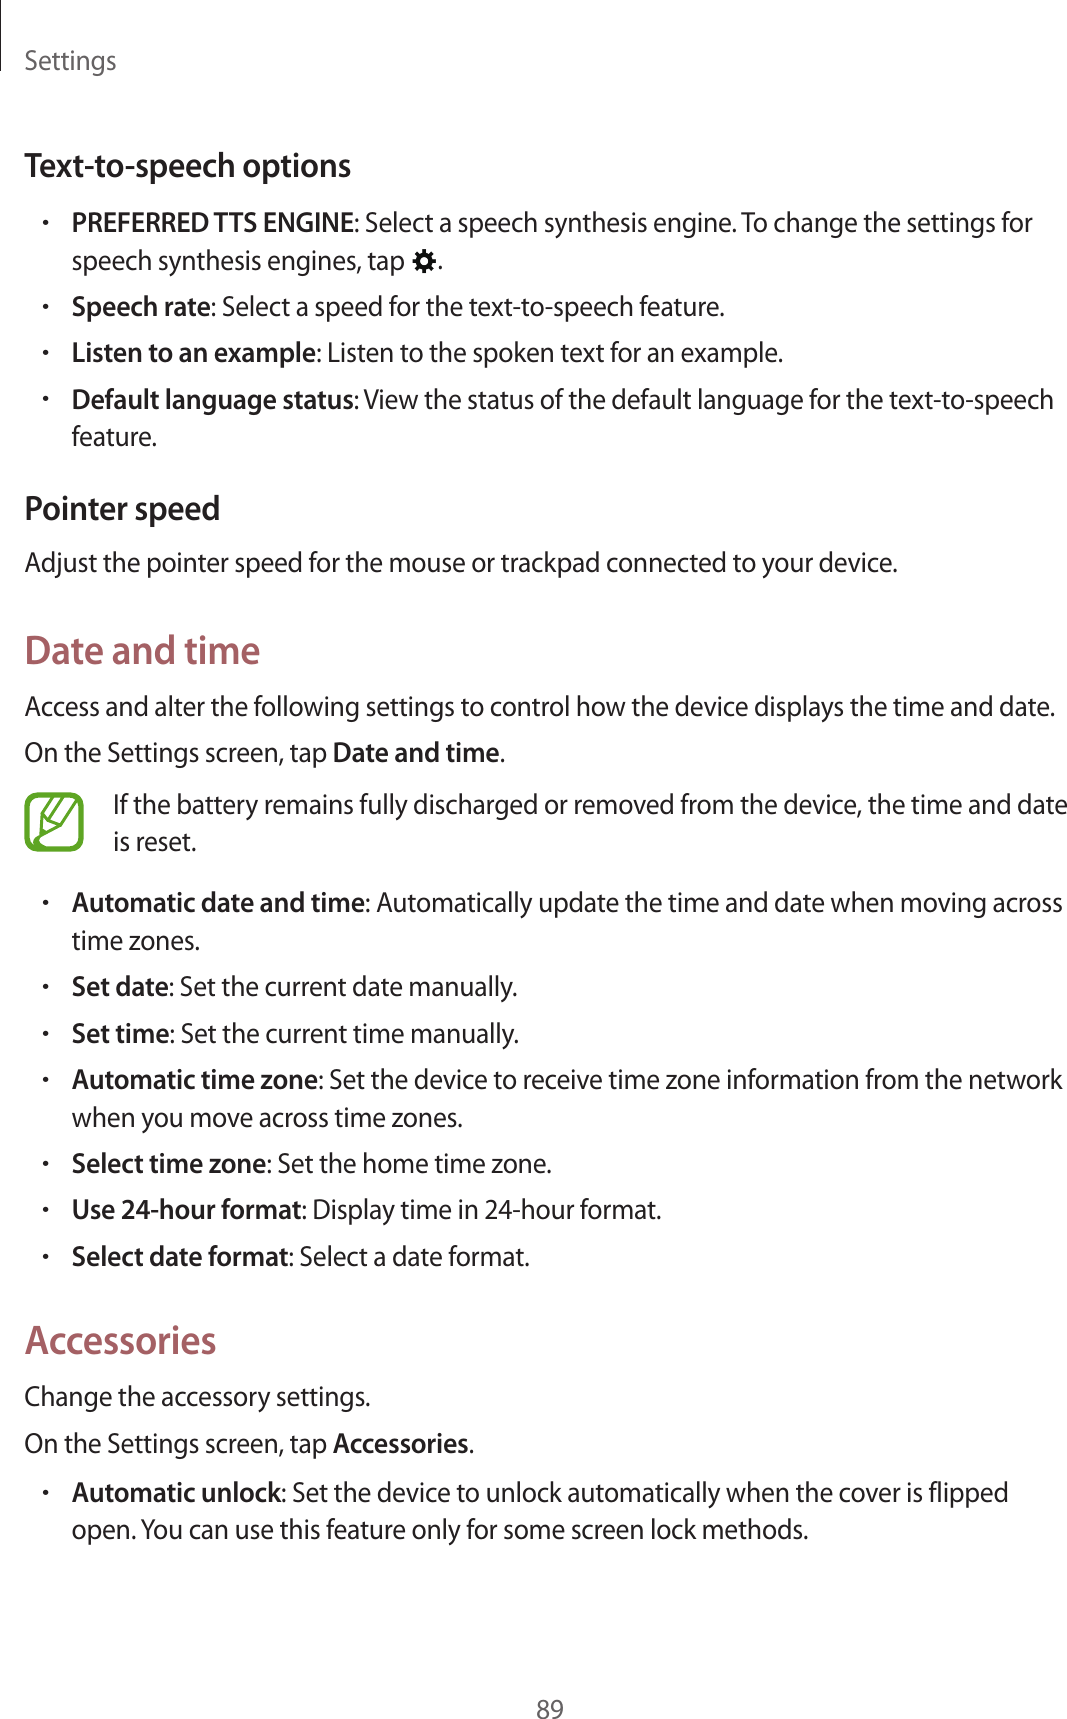 Settings89Text-to-speech options•PREFERRED TTS ENGINE: Select a speech synthesis engine. To change the settings for speech synthesis engines, tap  .•Speech rate: Select a speed for the text-to-speech feature.•Listen to an example: Listen to the spoken text for an example.•Default language status: View the status of the default language for the text-to-speech feature.Pointer speedAdjust the pointer speed for the mouse or trackpad connected to your device.Date and timeAccess and alter the following settings to control how the device displays the time and date.On the Settings screen, tap Date and time.If the battery remains fully discharged or removed from the device, the time and date is reset.•Automatic date and time: Automatically update the time and date when moving across time zones.•Set date: Set the current date manually.•Set time: Set the current time manually.•Automatic time zone: Set the device to receive time zone information from the network when you move across time zones.•Select time zone: Set the home time zone.•Use 24-hour format: Display time in 24-hour format.•Select date format: Select a date format.AccessoriesChange the accessory settings.On the Settings screen, tap Accessories.•Automatic unlock: Set the device to unlock automatically when the cover is flipped open. You can use this feature only for some screen lock methods.